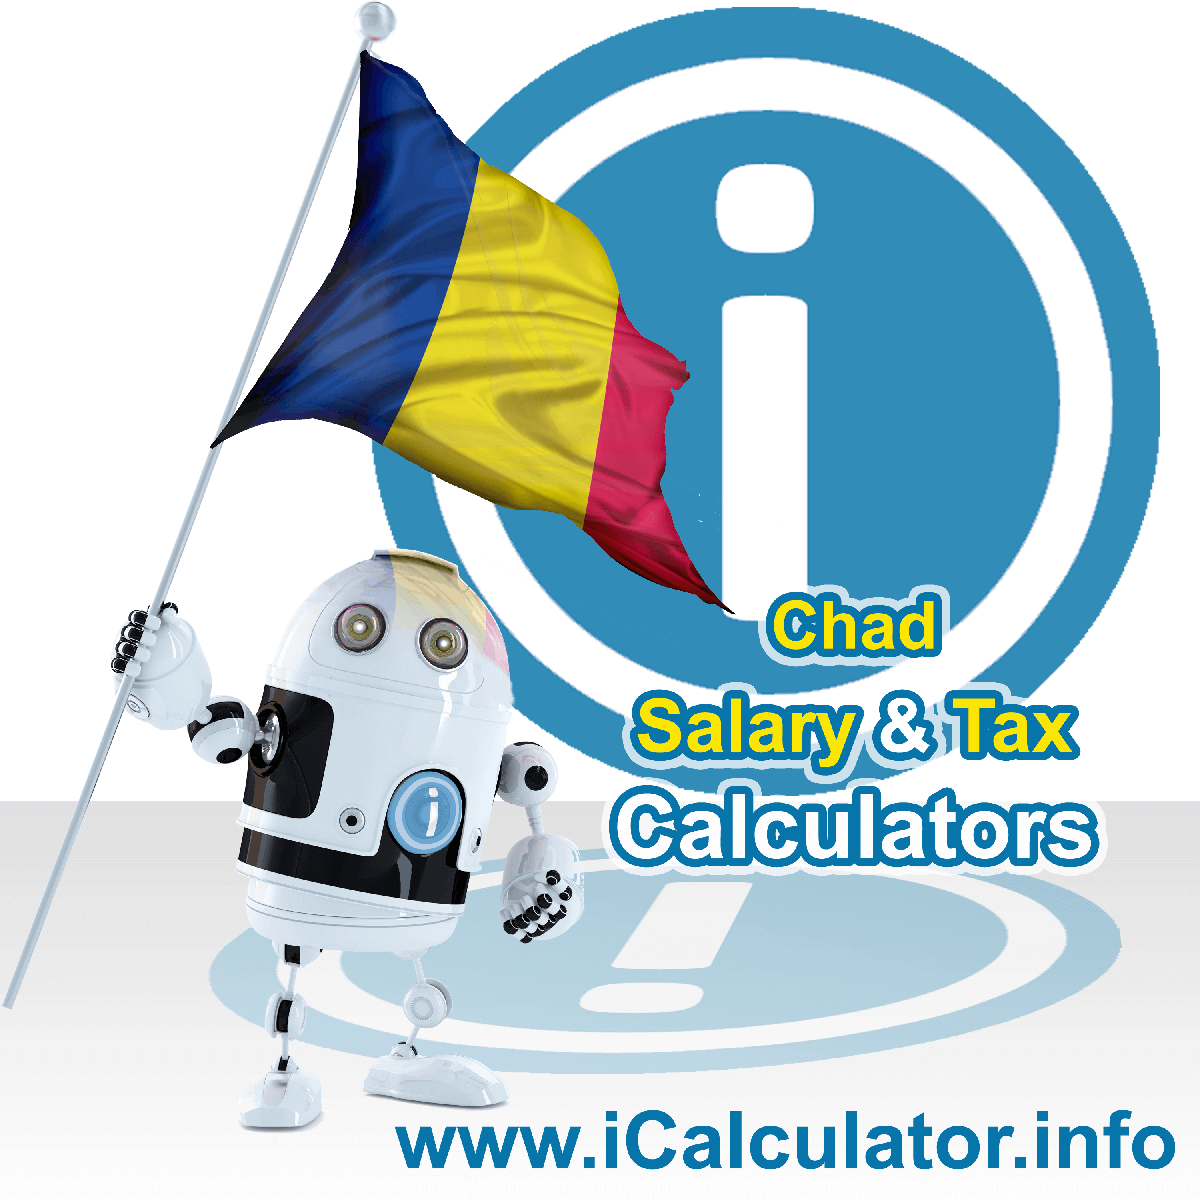 Chad Tax Calculator. This image shows the Chad flag and information relating to the tax formula for the Chad Salary Calculator